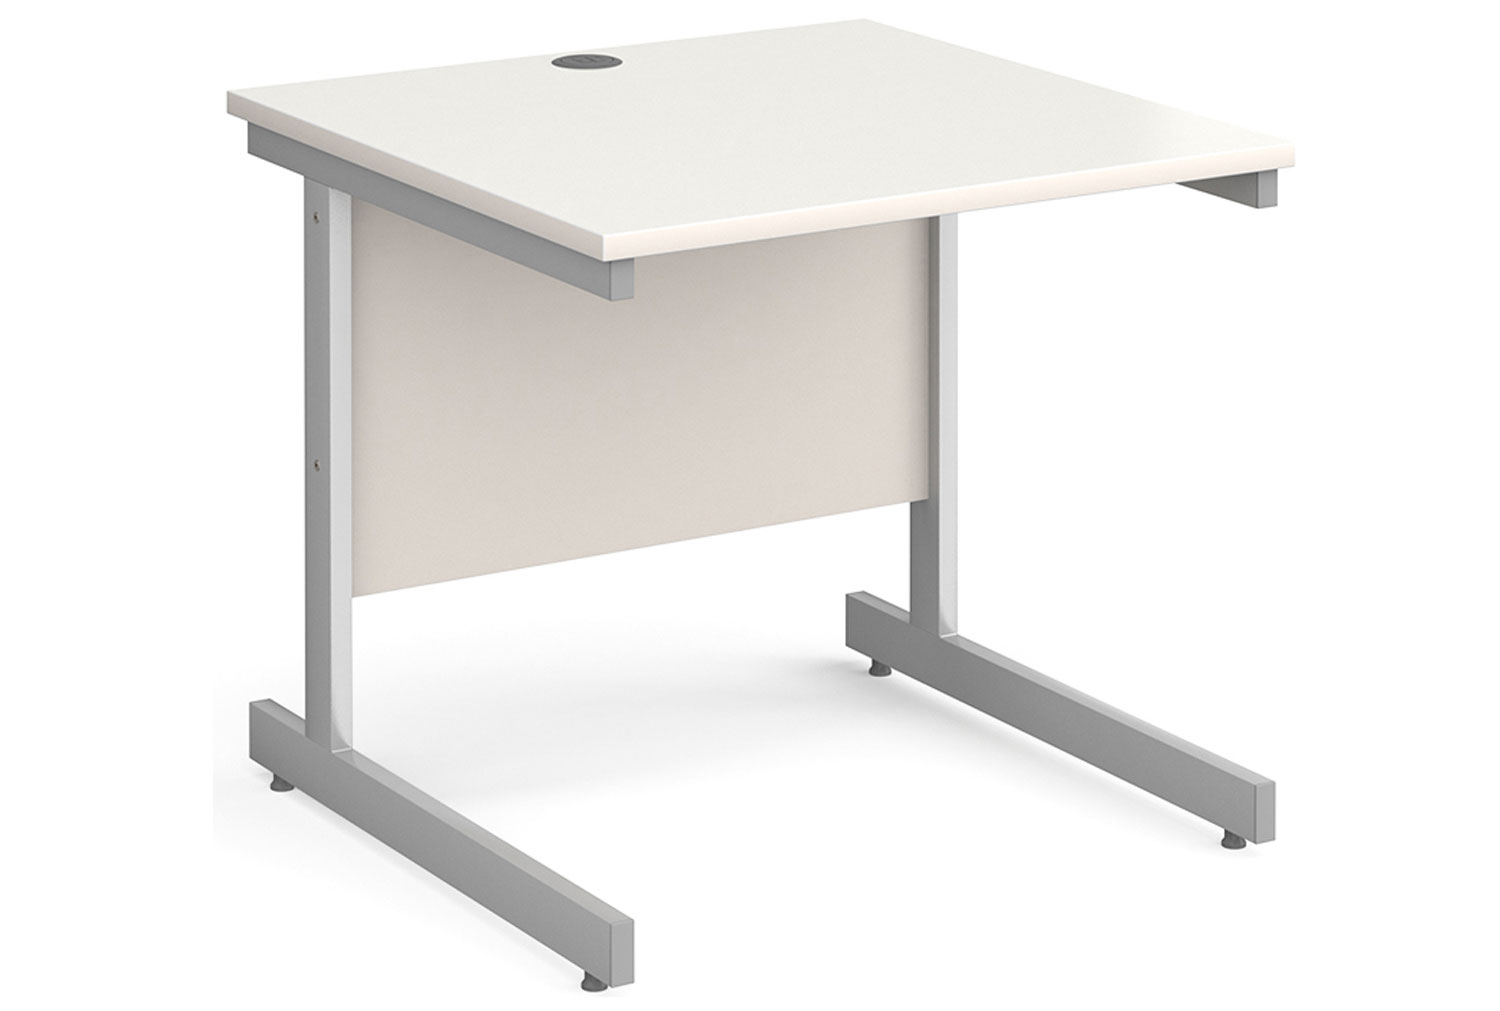 Thrifty Next-Day Rectangular Office Desk White, 80wx80dx73h (cm), Express Delivery